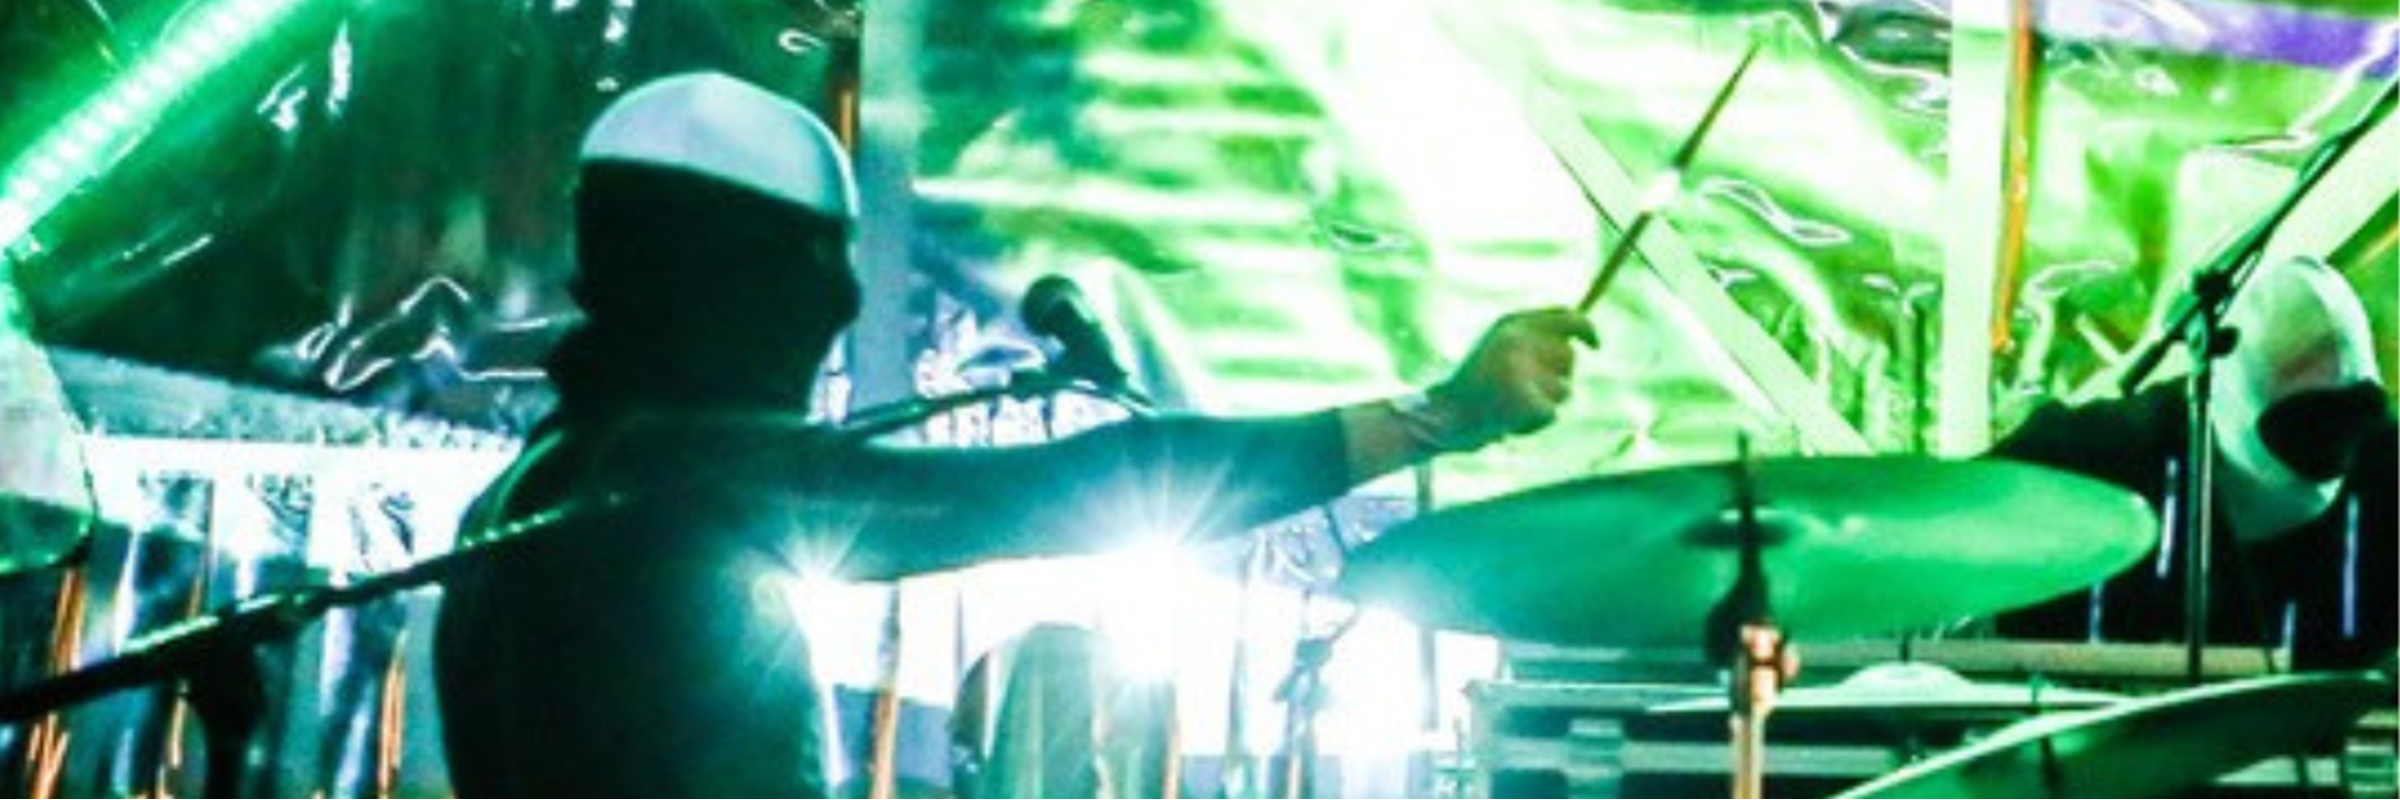 A person playing the drums surrounded by green lasers and lights